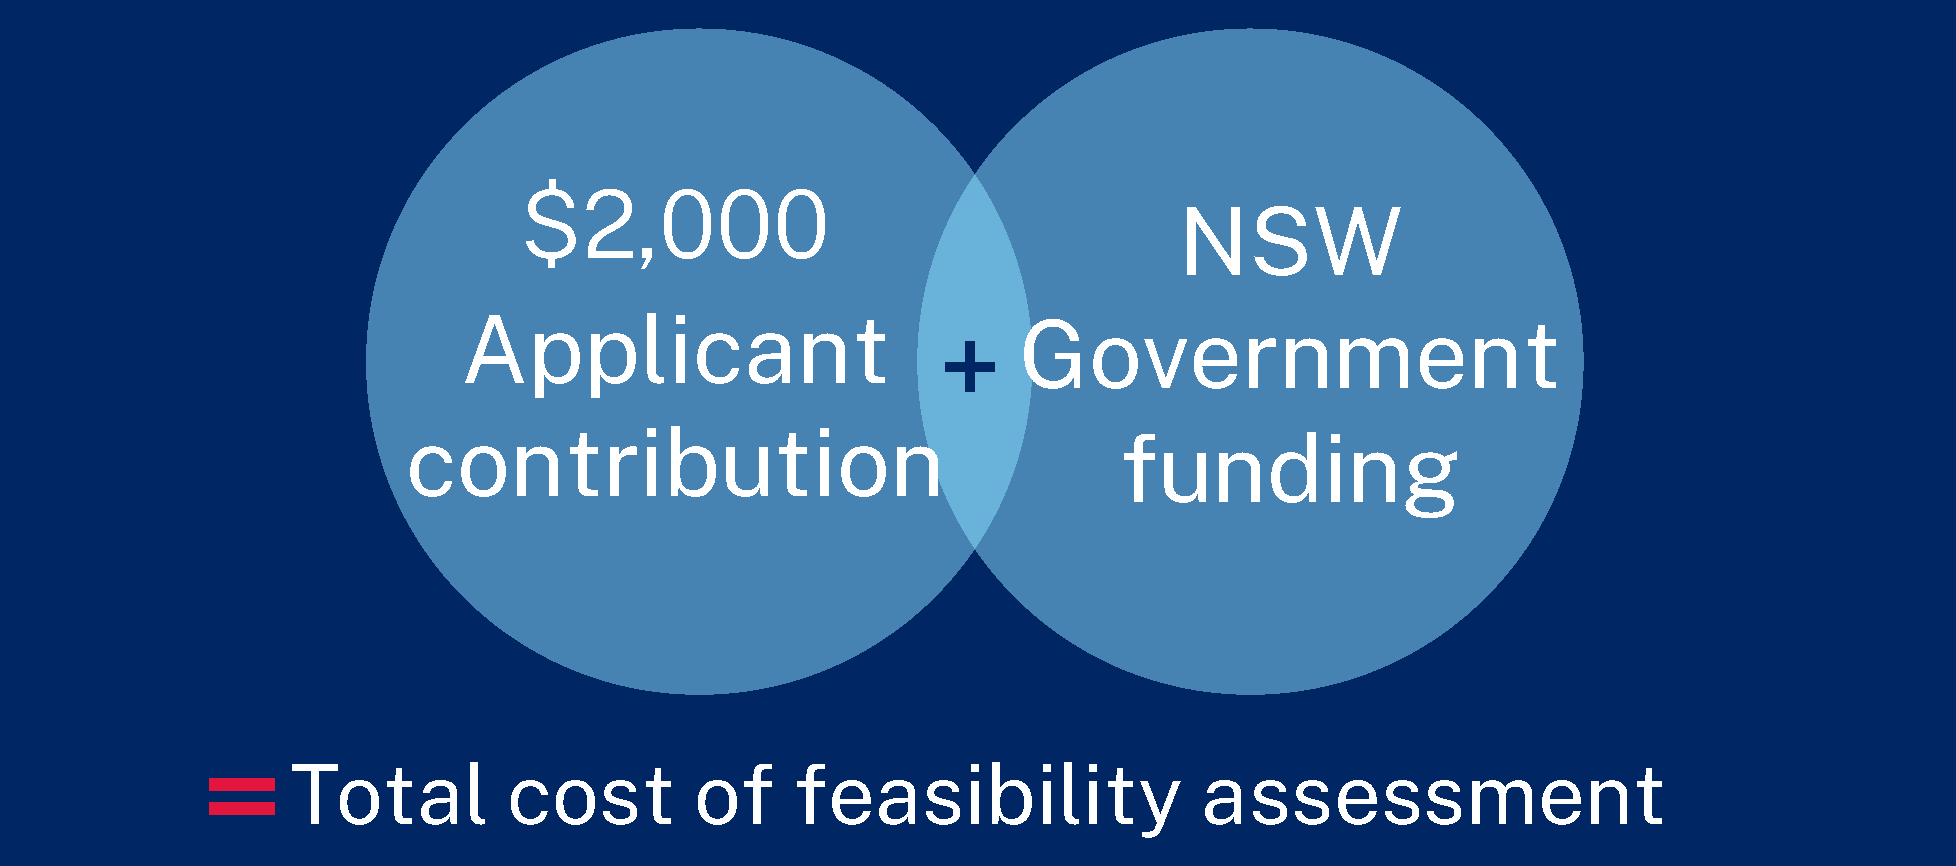 Infographic showing $2,000 applicant contribution + NSW government funding = total cost of feasibility assessment